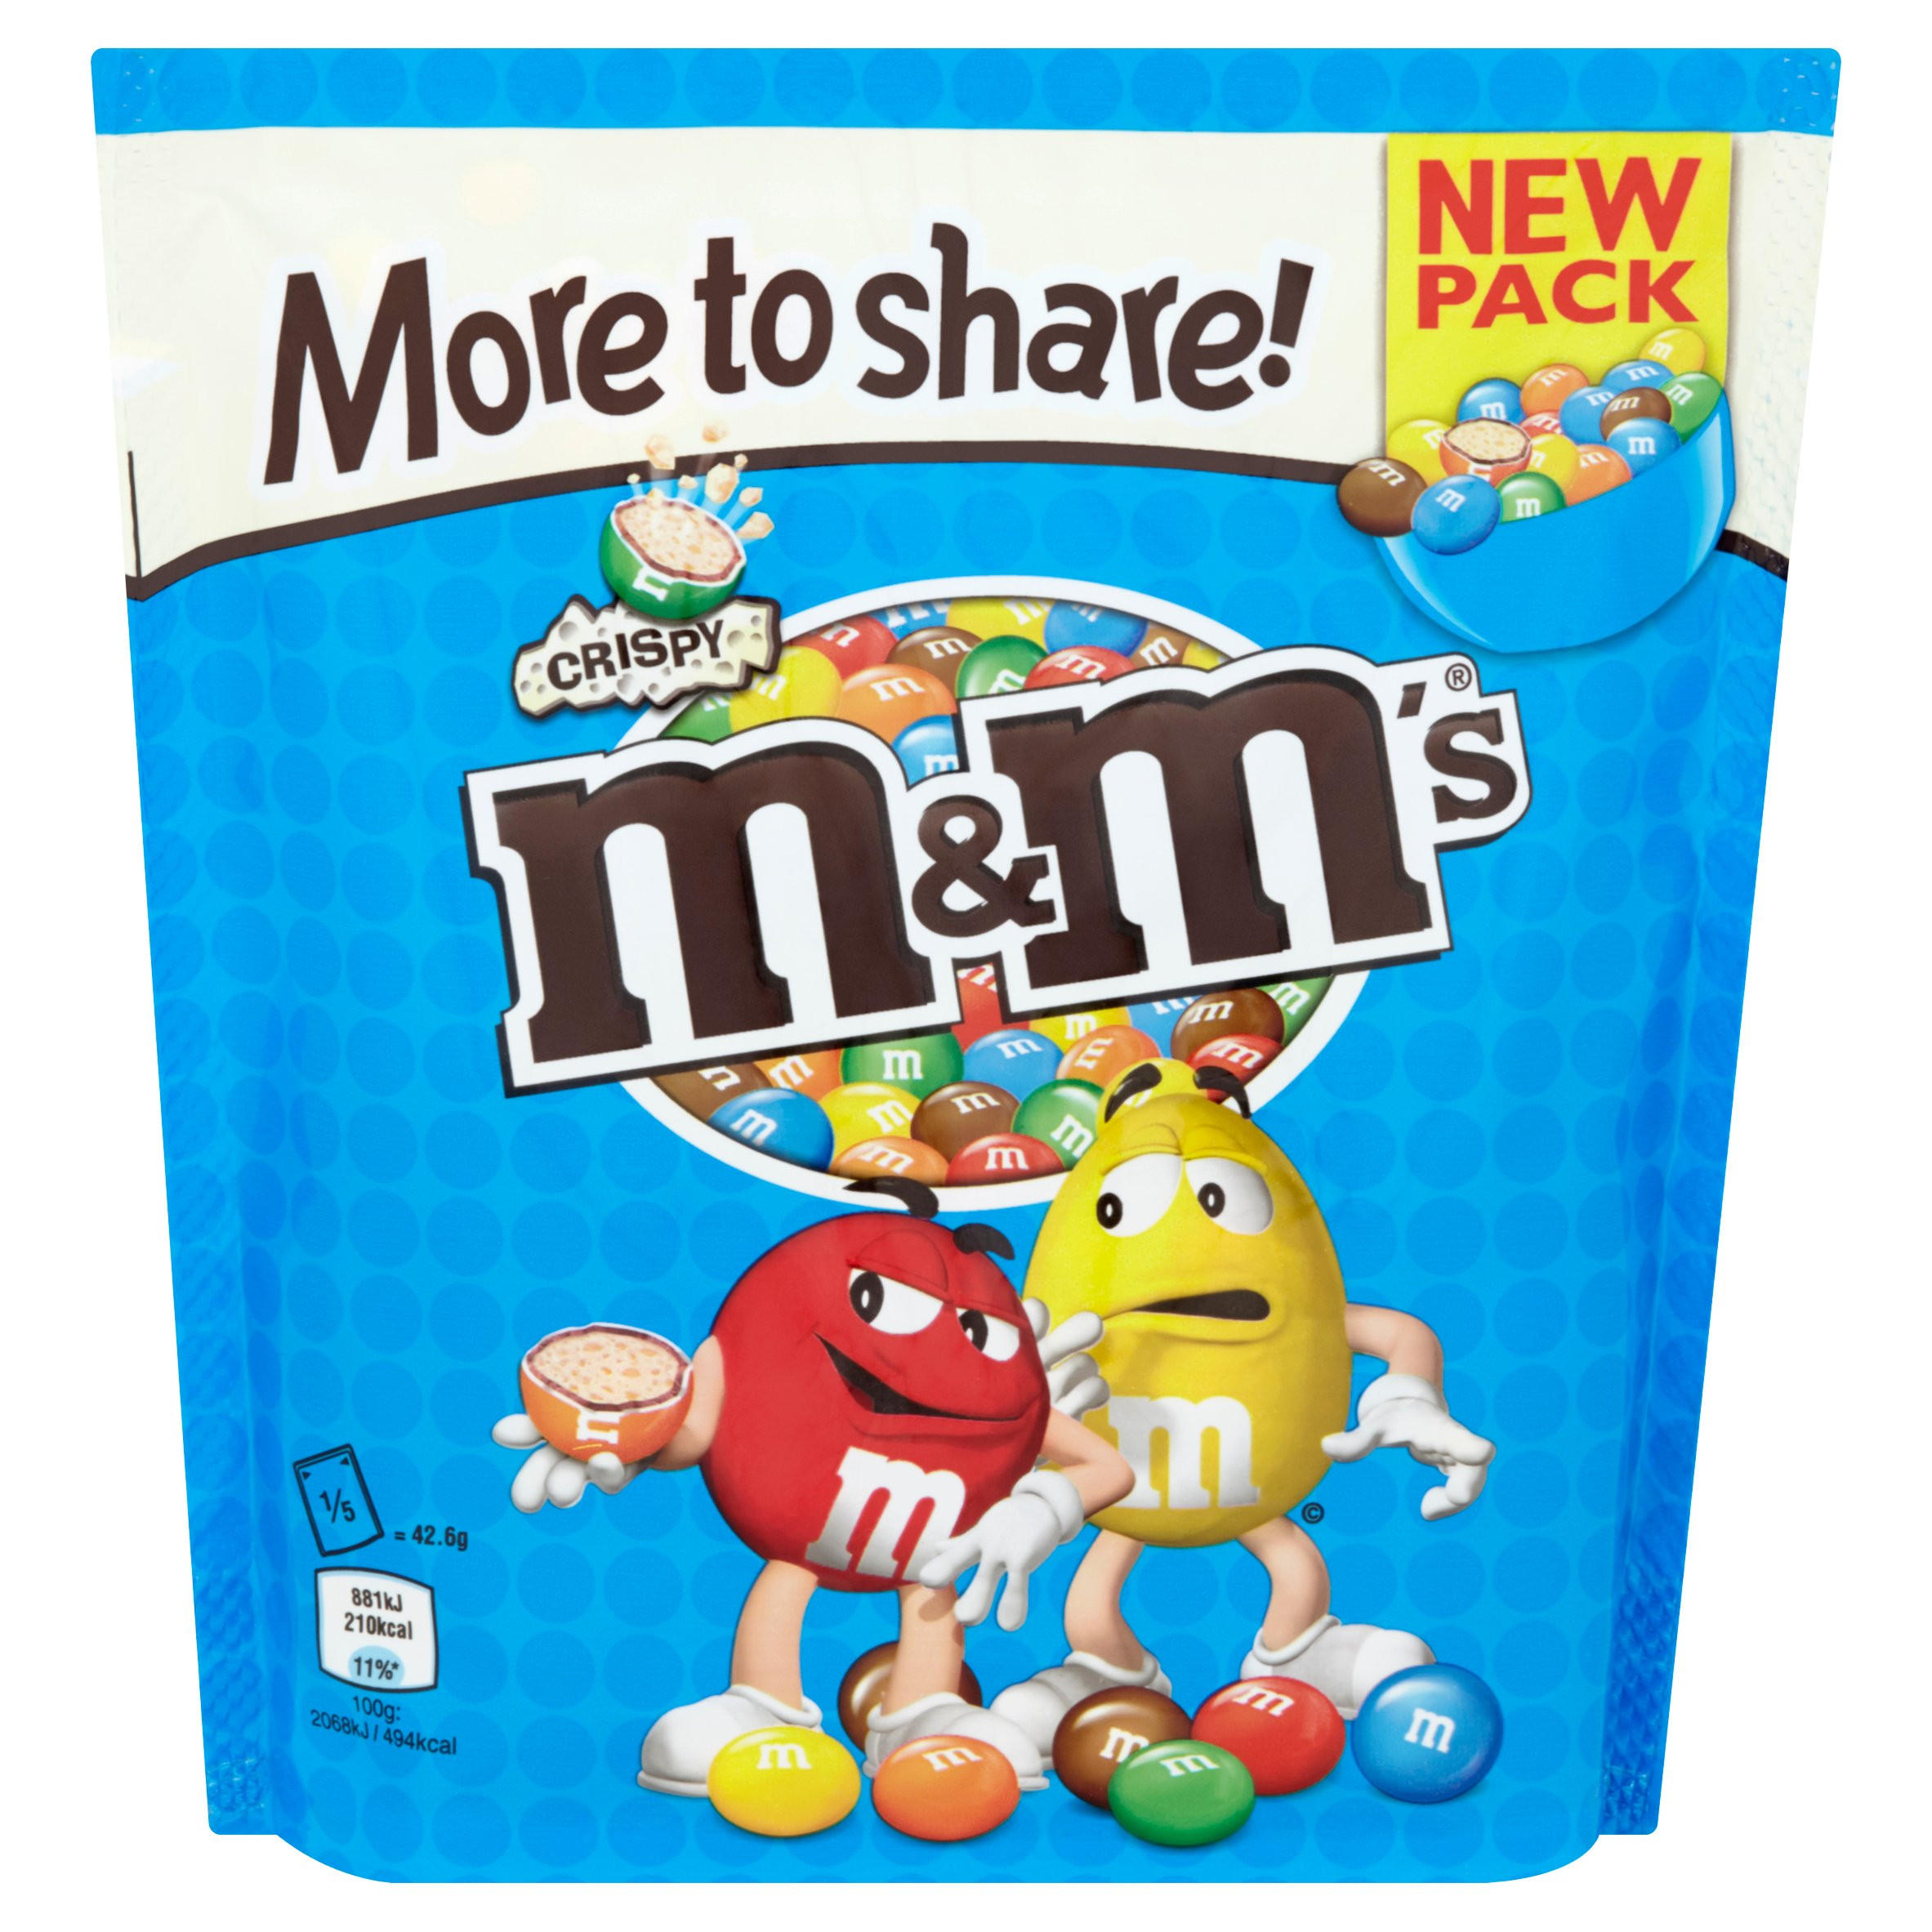 M&M's Brownie Chocolate More to Share Pouch Bag 213g